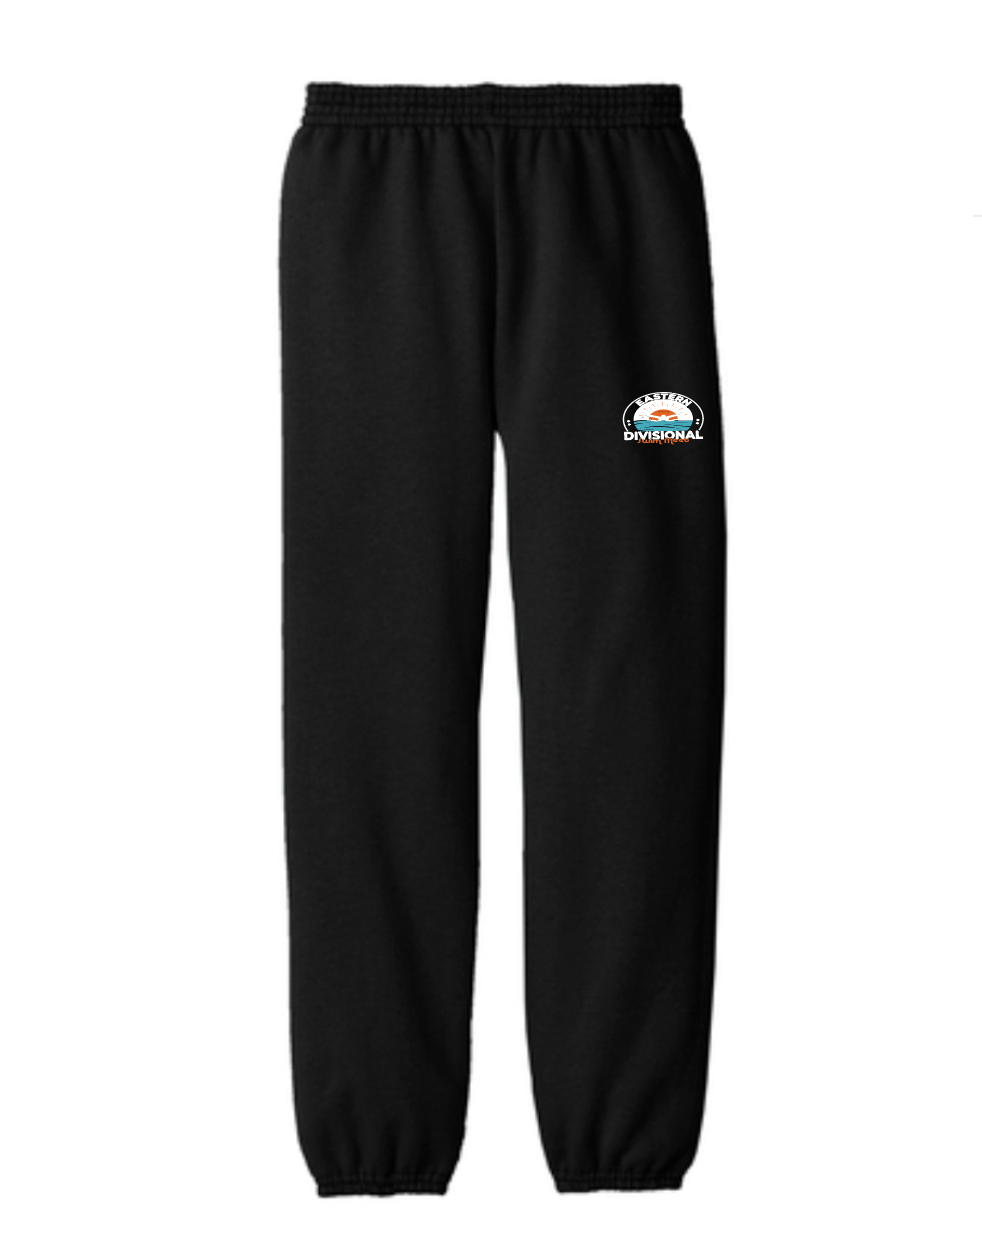 **YOUTH** Eastern Divisional Swim Meet ELASTIC CUFF Sweat Pants - MULTIPLE COLORS AVAILABLE